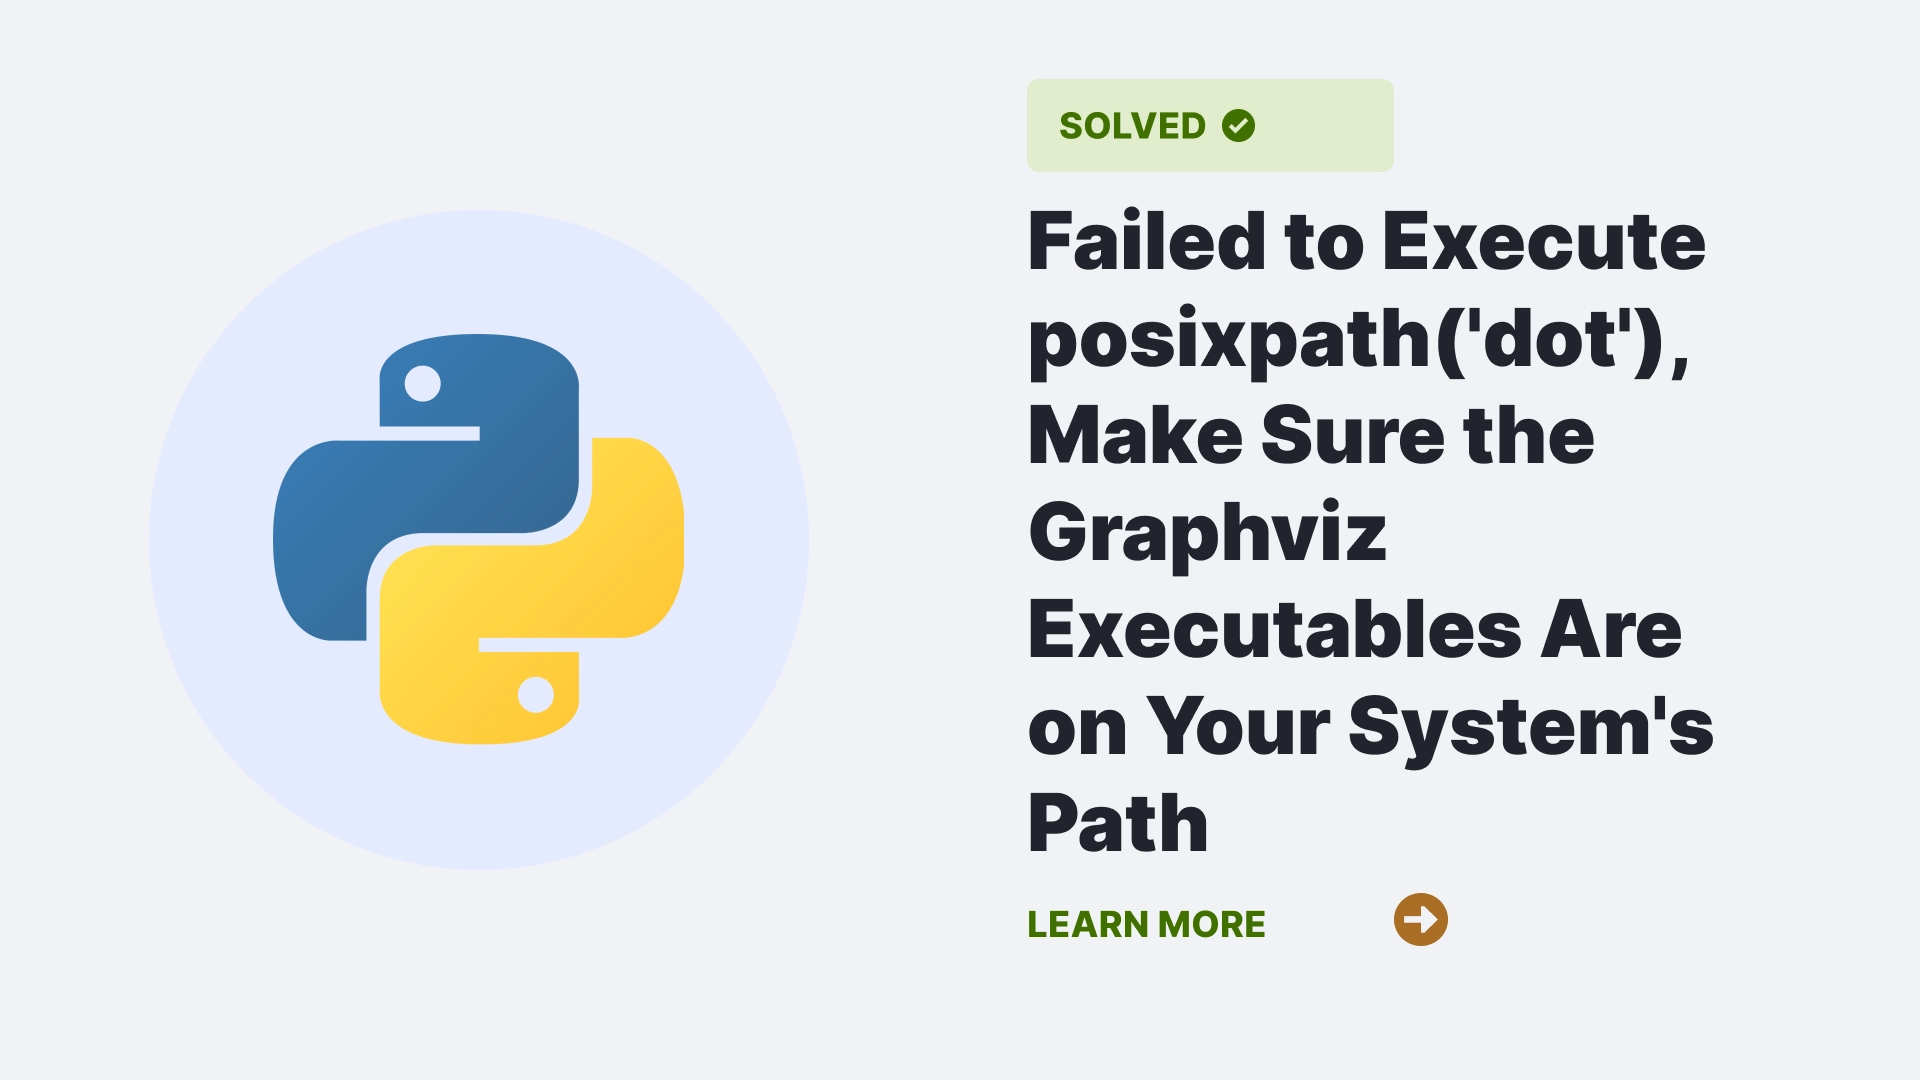 Failed to Execute posixpath('dot'), Make Sure the Graphviz Executables Are on Your System's Path